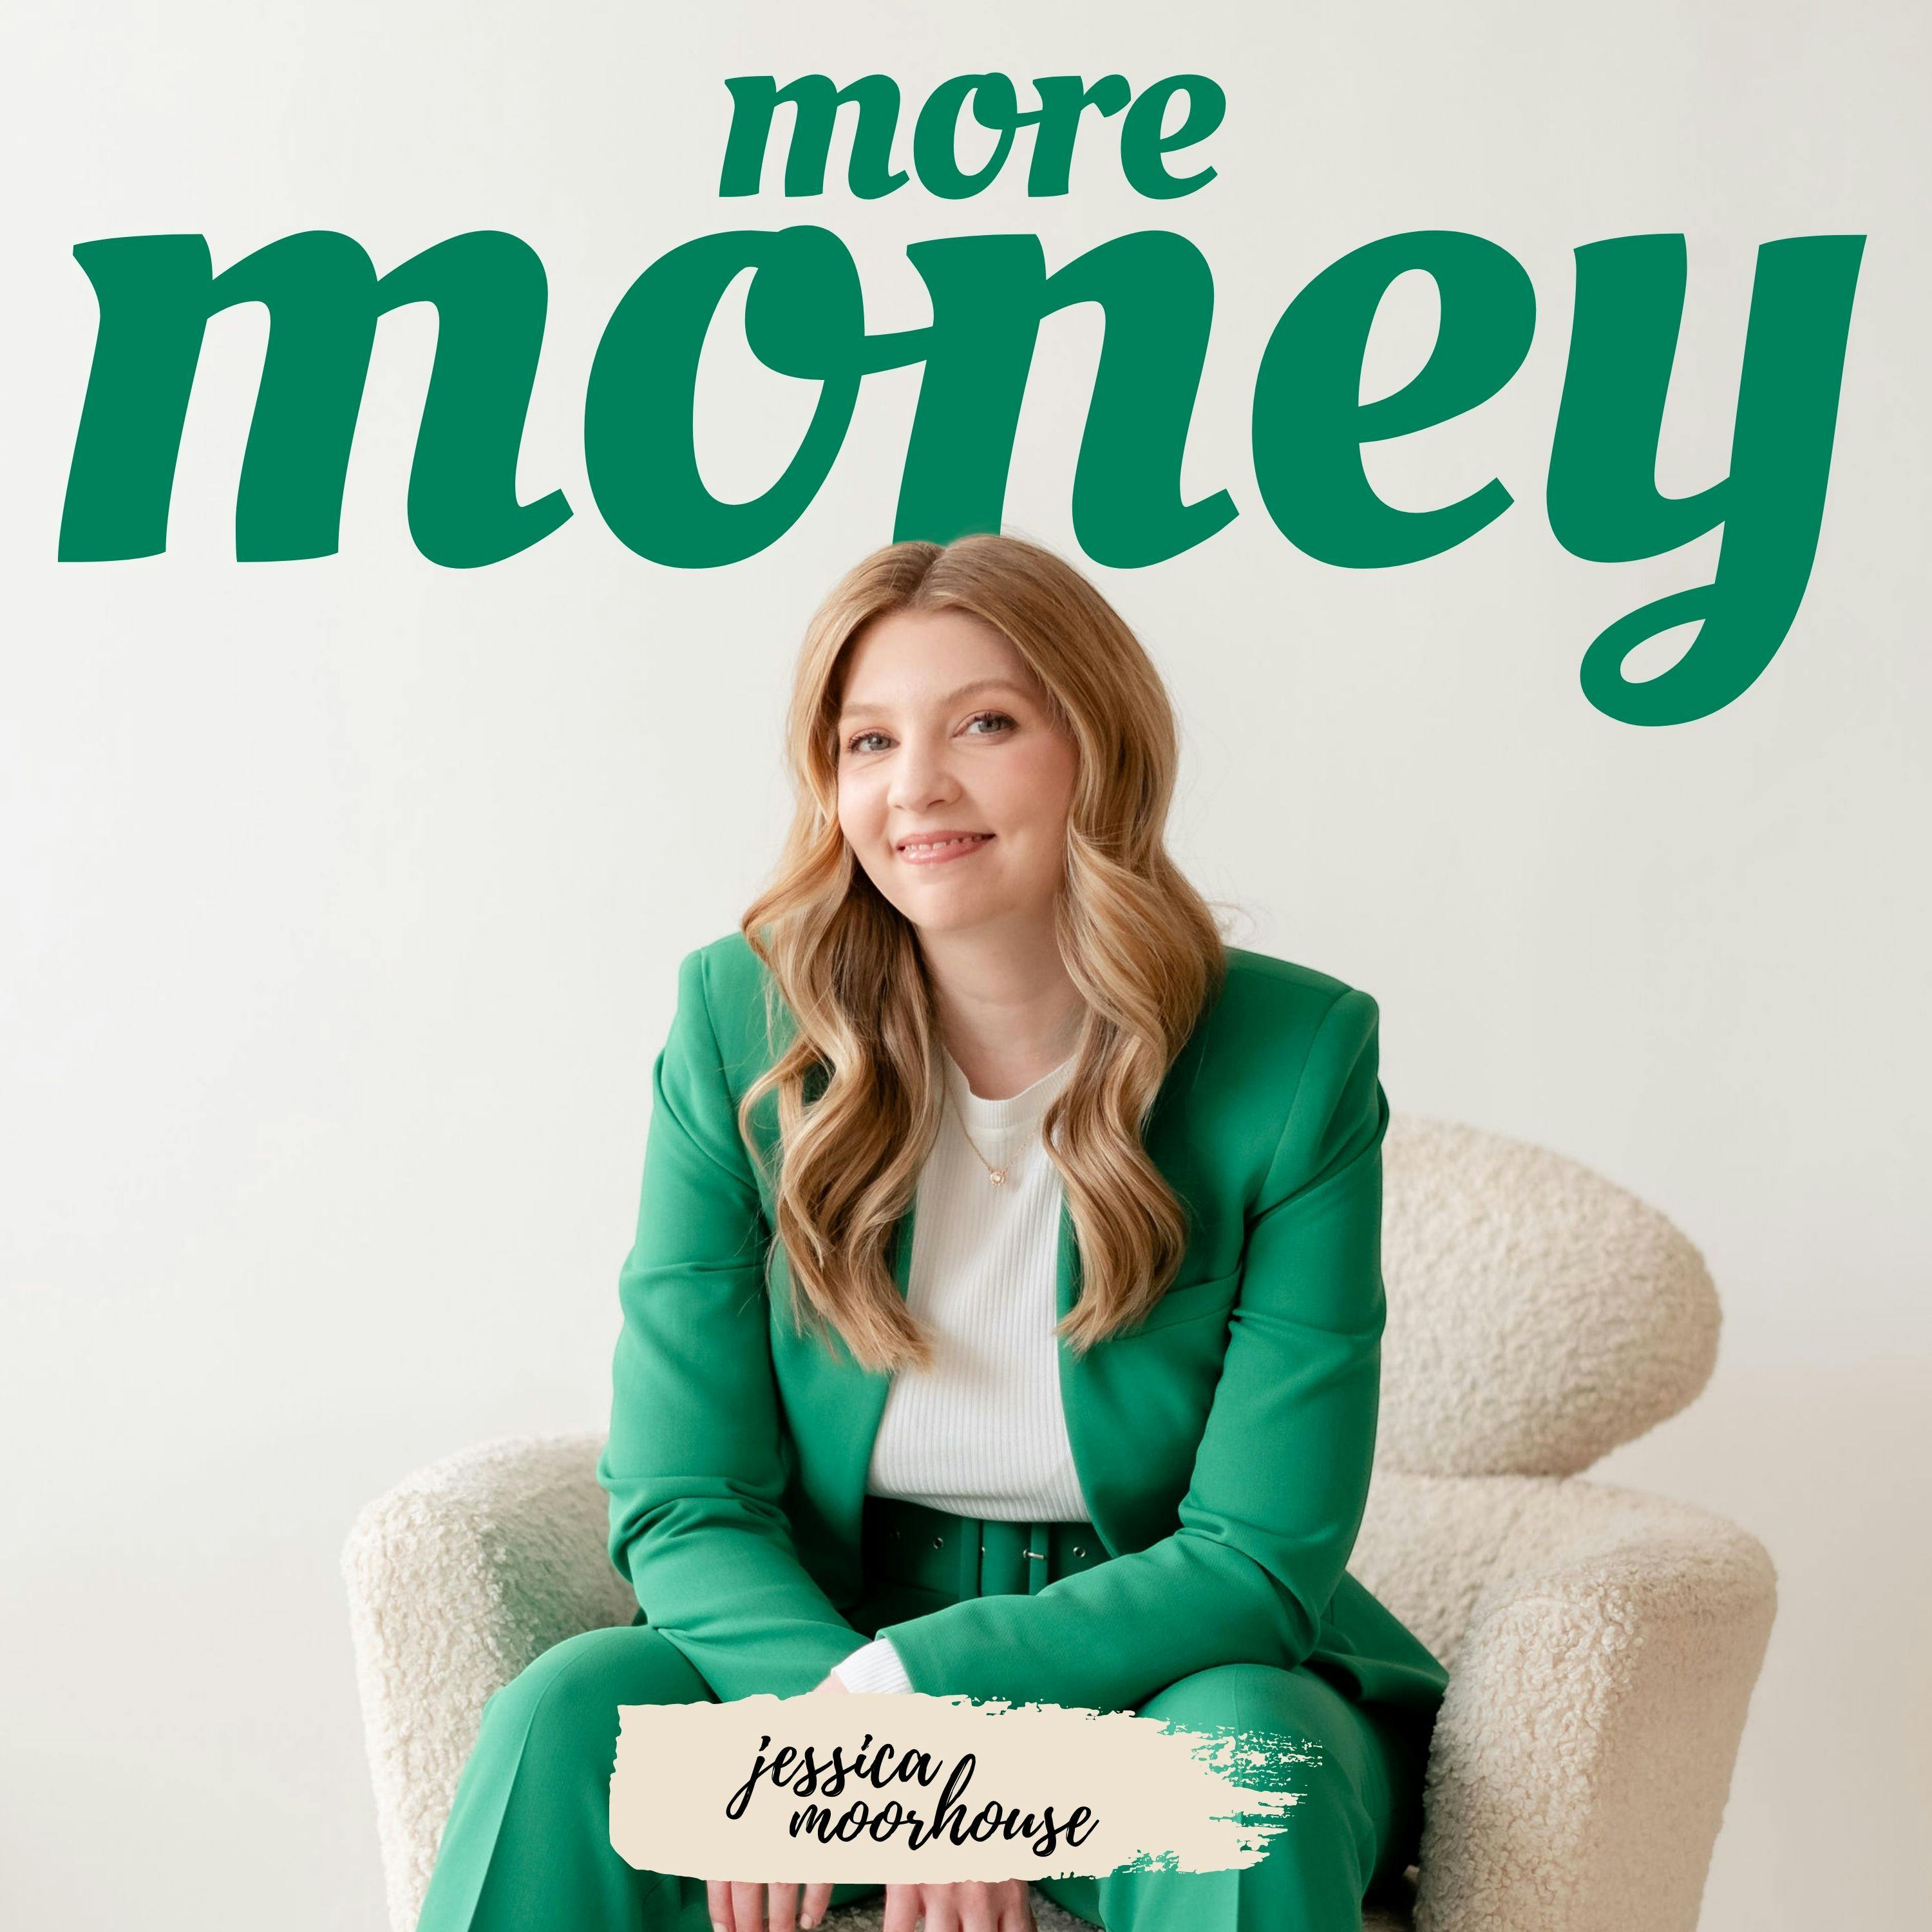 102 Listener Series - How to Manage Your Money the Smart Way While Self-Employed